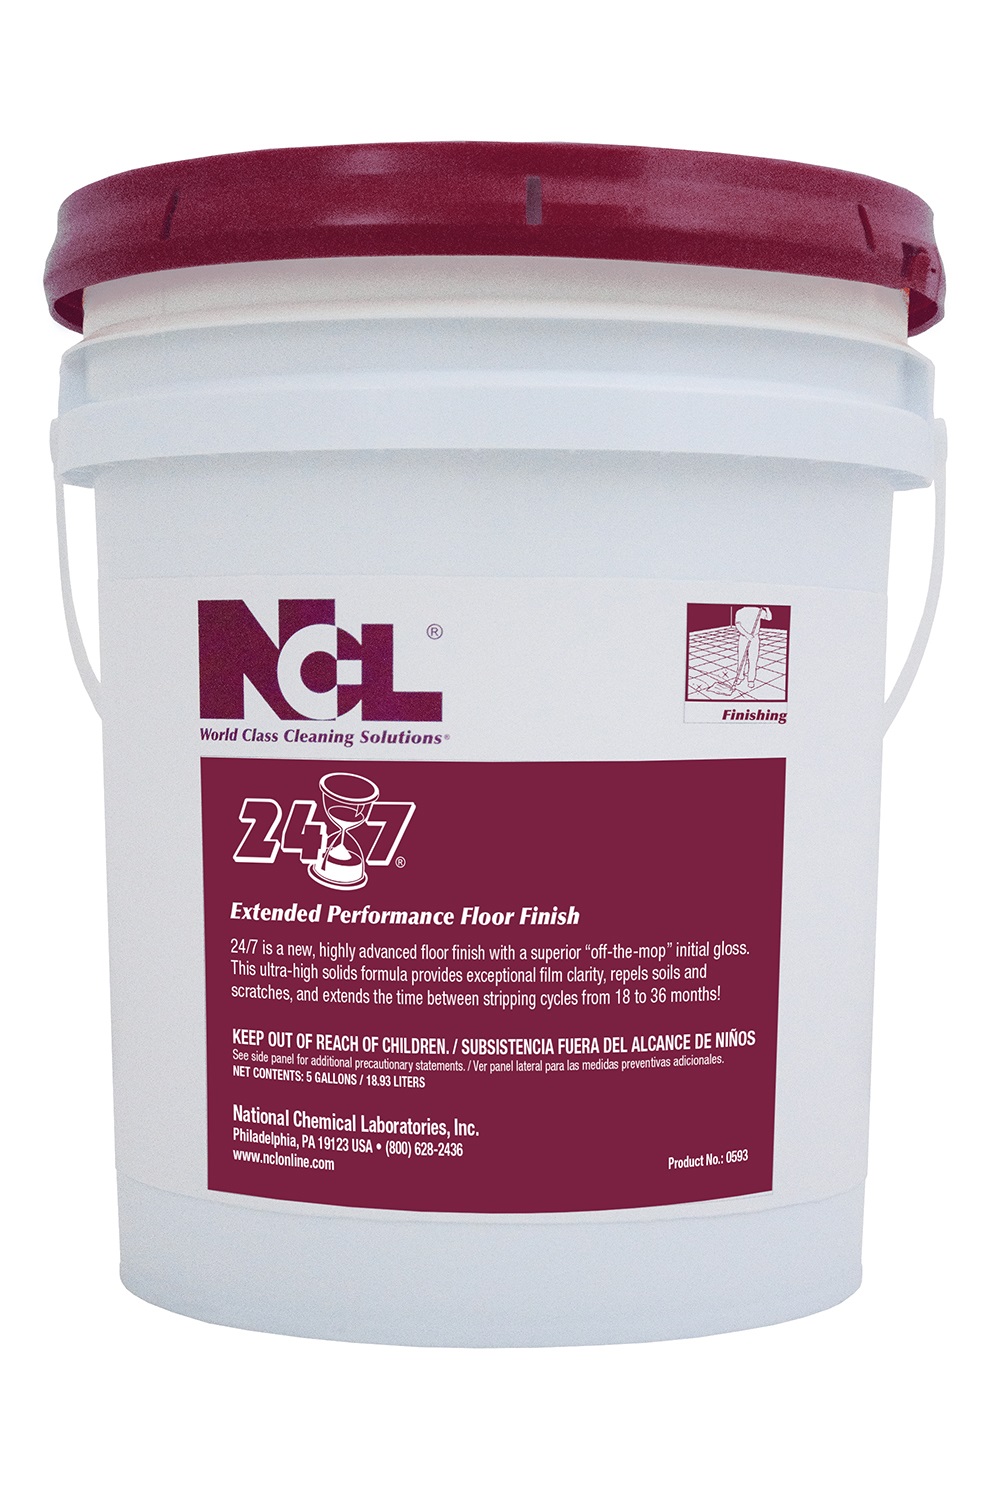 NCL 24/7 Extended Performance
Floor Finish - (5gal)